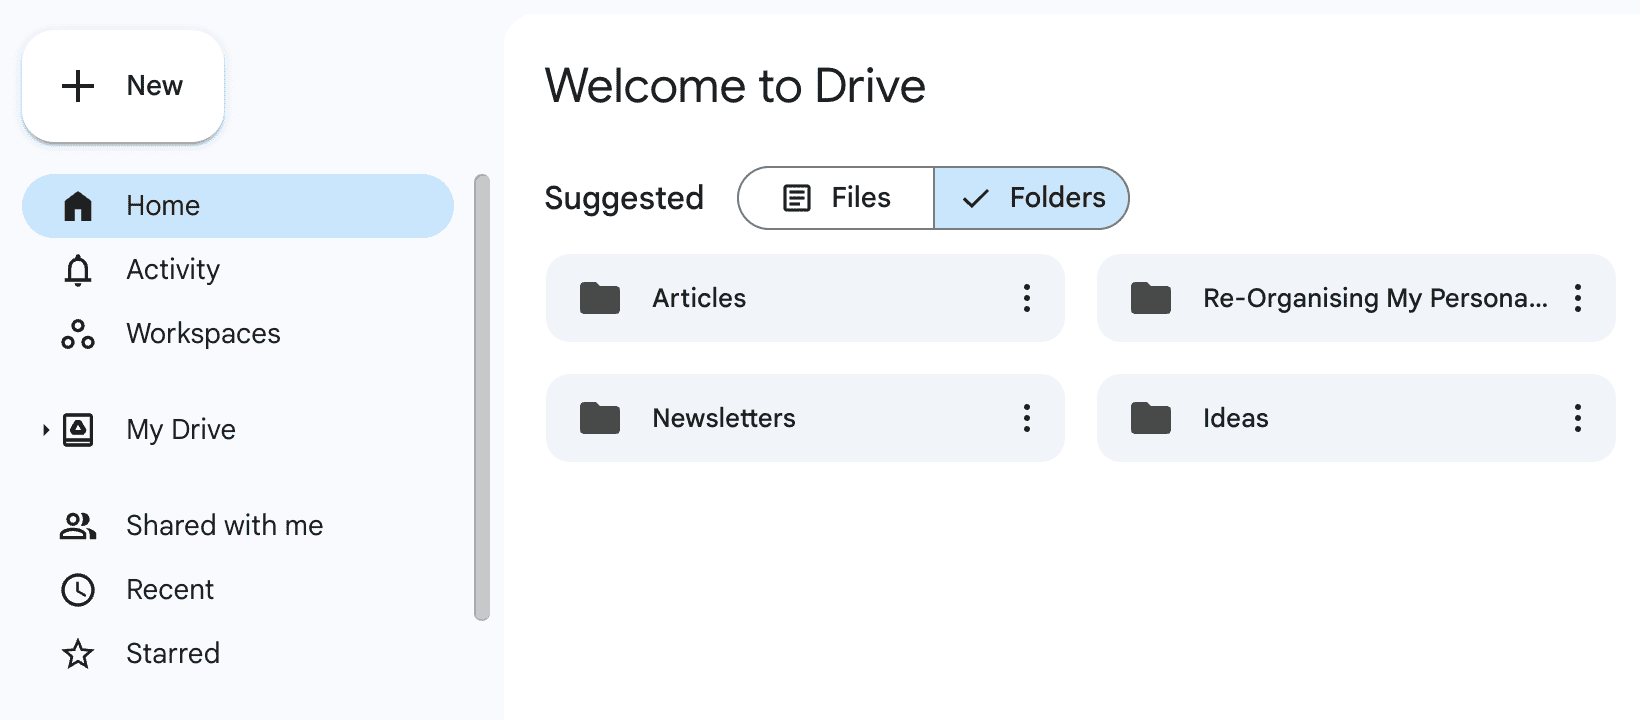 The interface on Google Drive